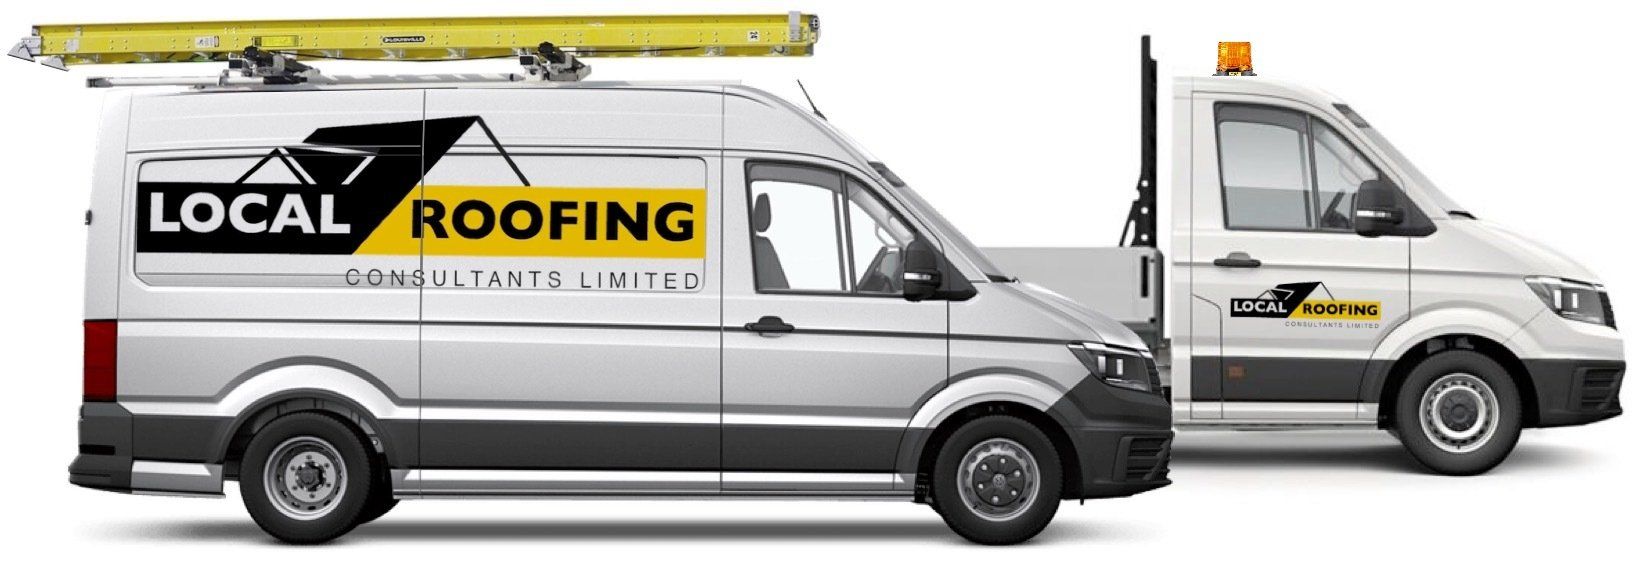 Local Roofing Consultants Limited work in Chessington and throughout the London area